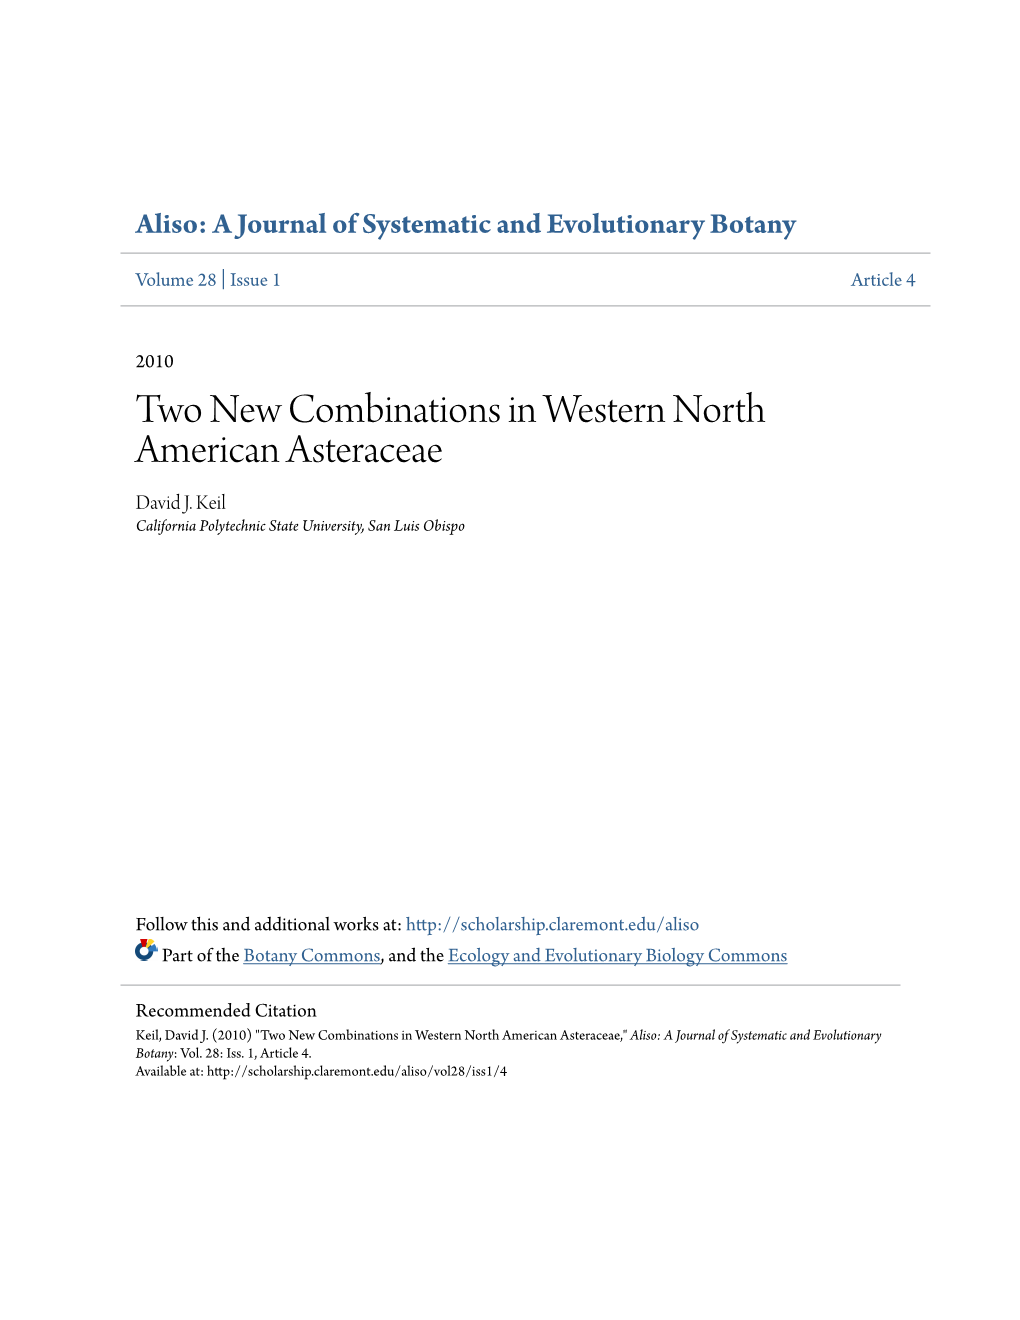 Two New Combinations in Western North American Asteraceae David J